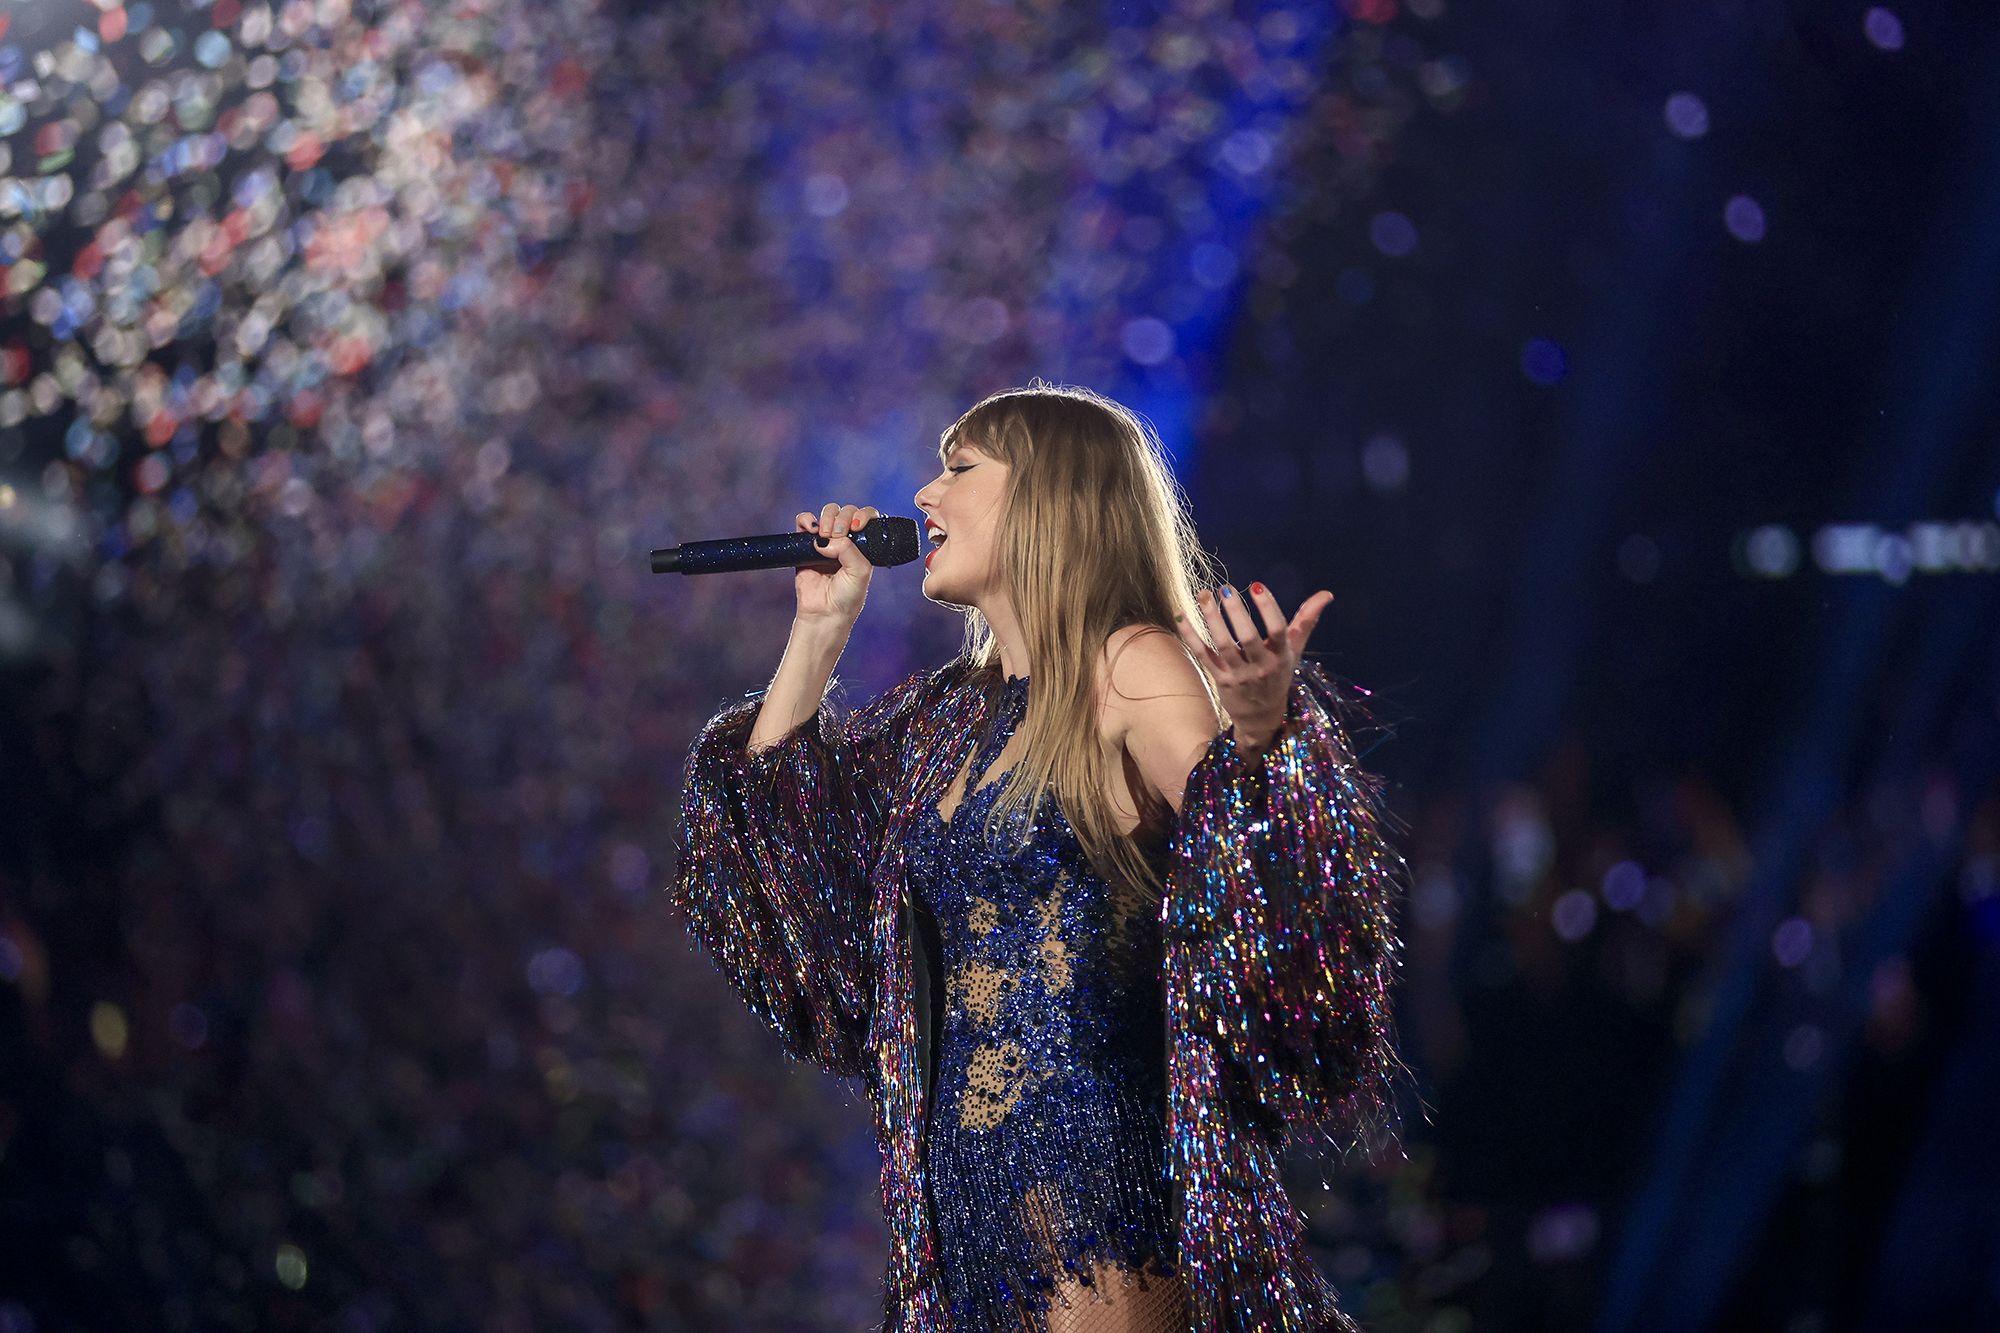 Video: Taylor Swift named Time's 2023 'Person of the Year